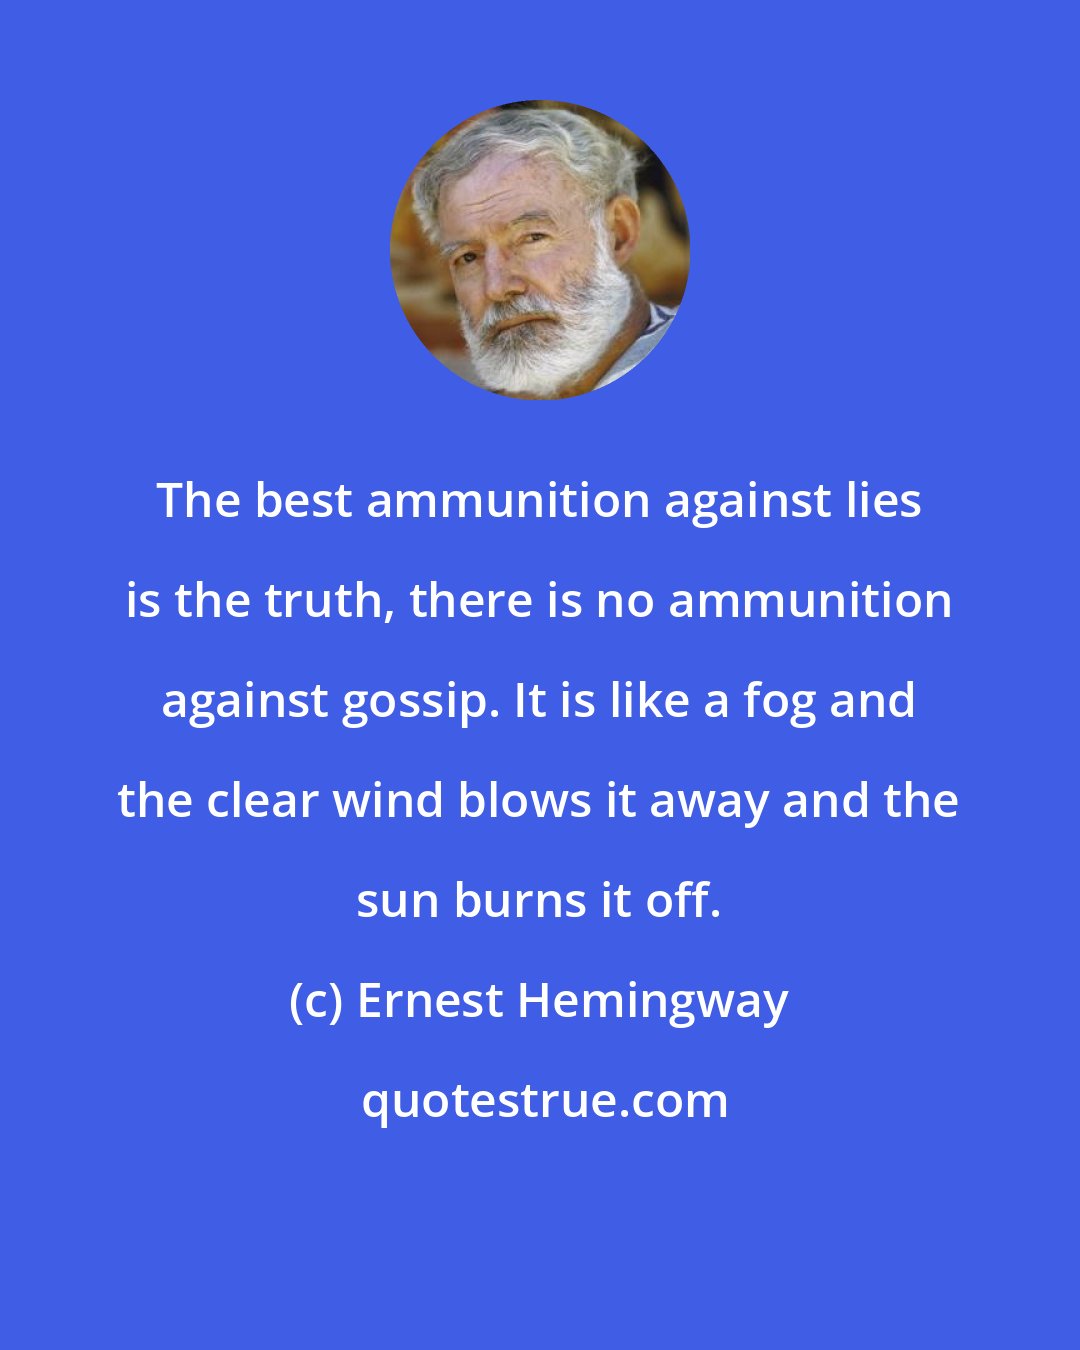 Ernest Hemingway: The best ammunition against lies is the truth, there is no ammunition against gossip. It is like a fog and the clear wind blows it away and the sun burns it off.